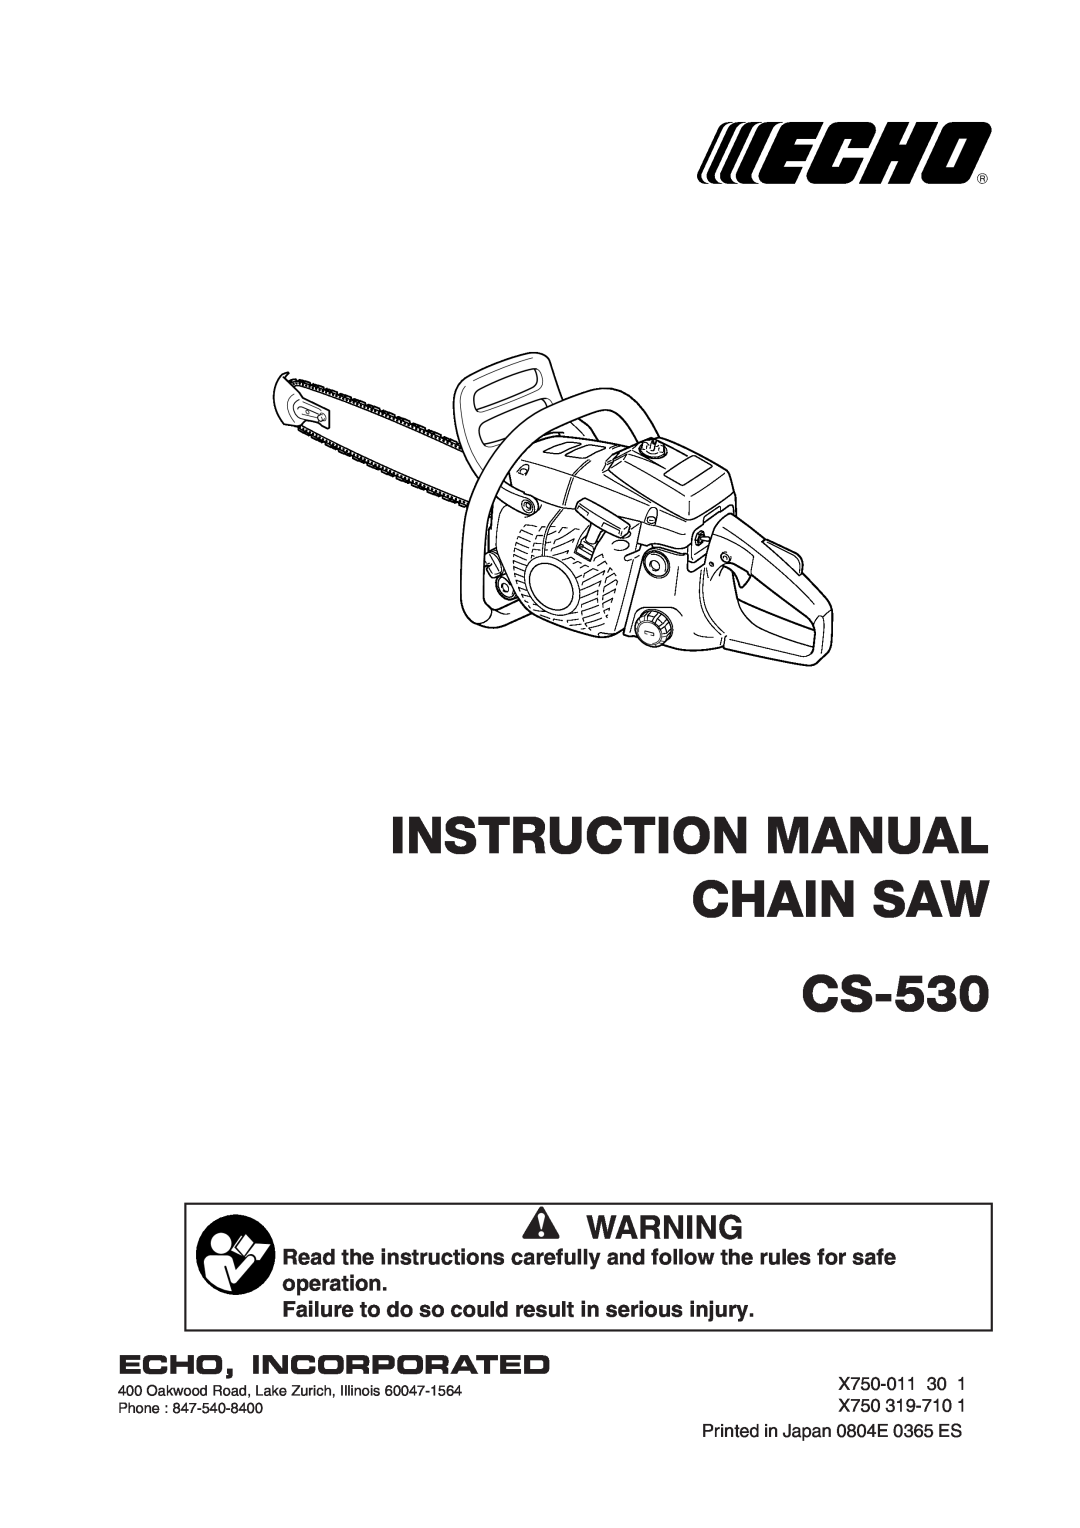 Echo instruction manual Failure to do so could result in serious injury, INSTRUCTION MANUAL CHAIN SAW CS-530, Phone 